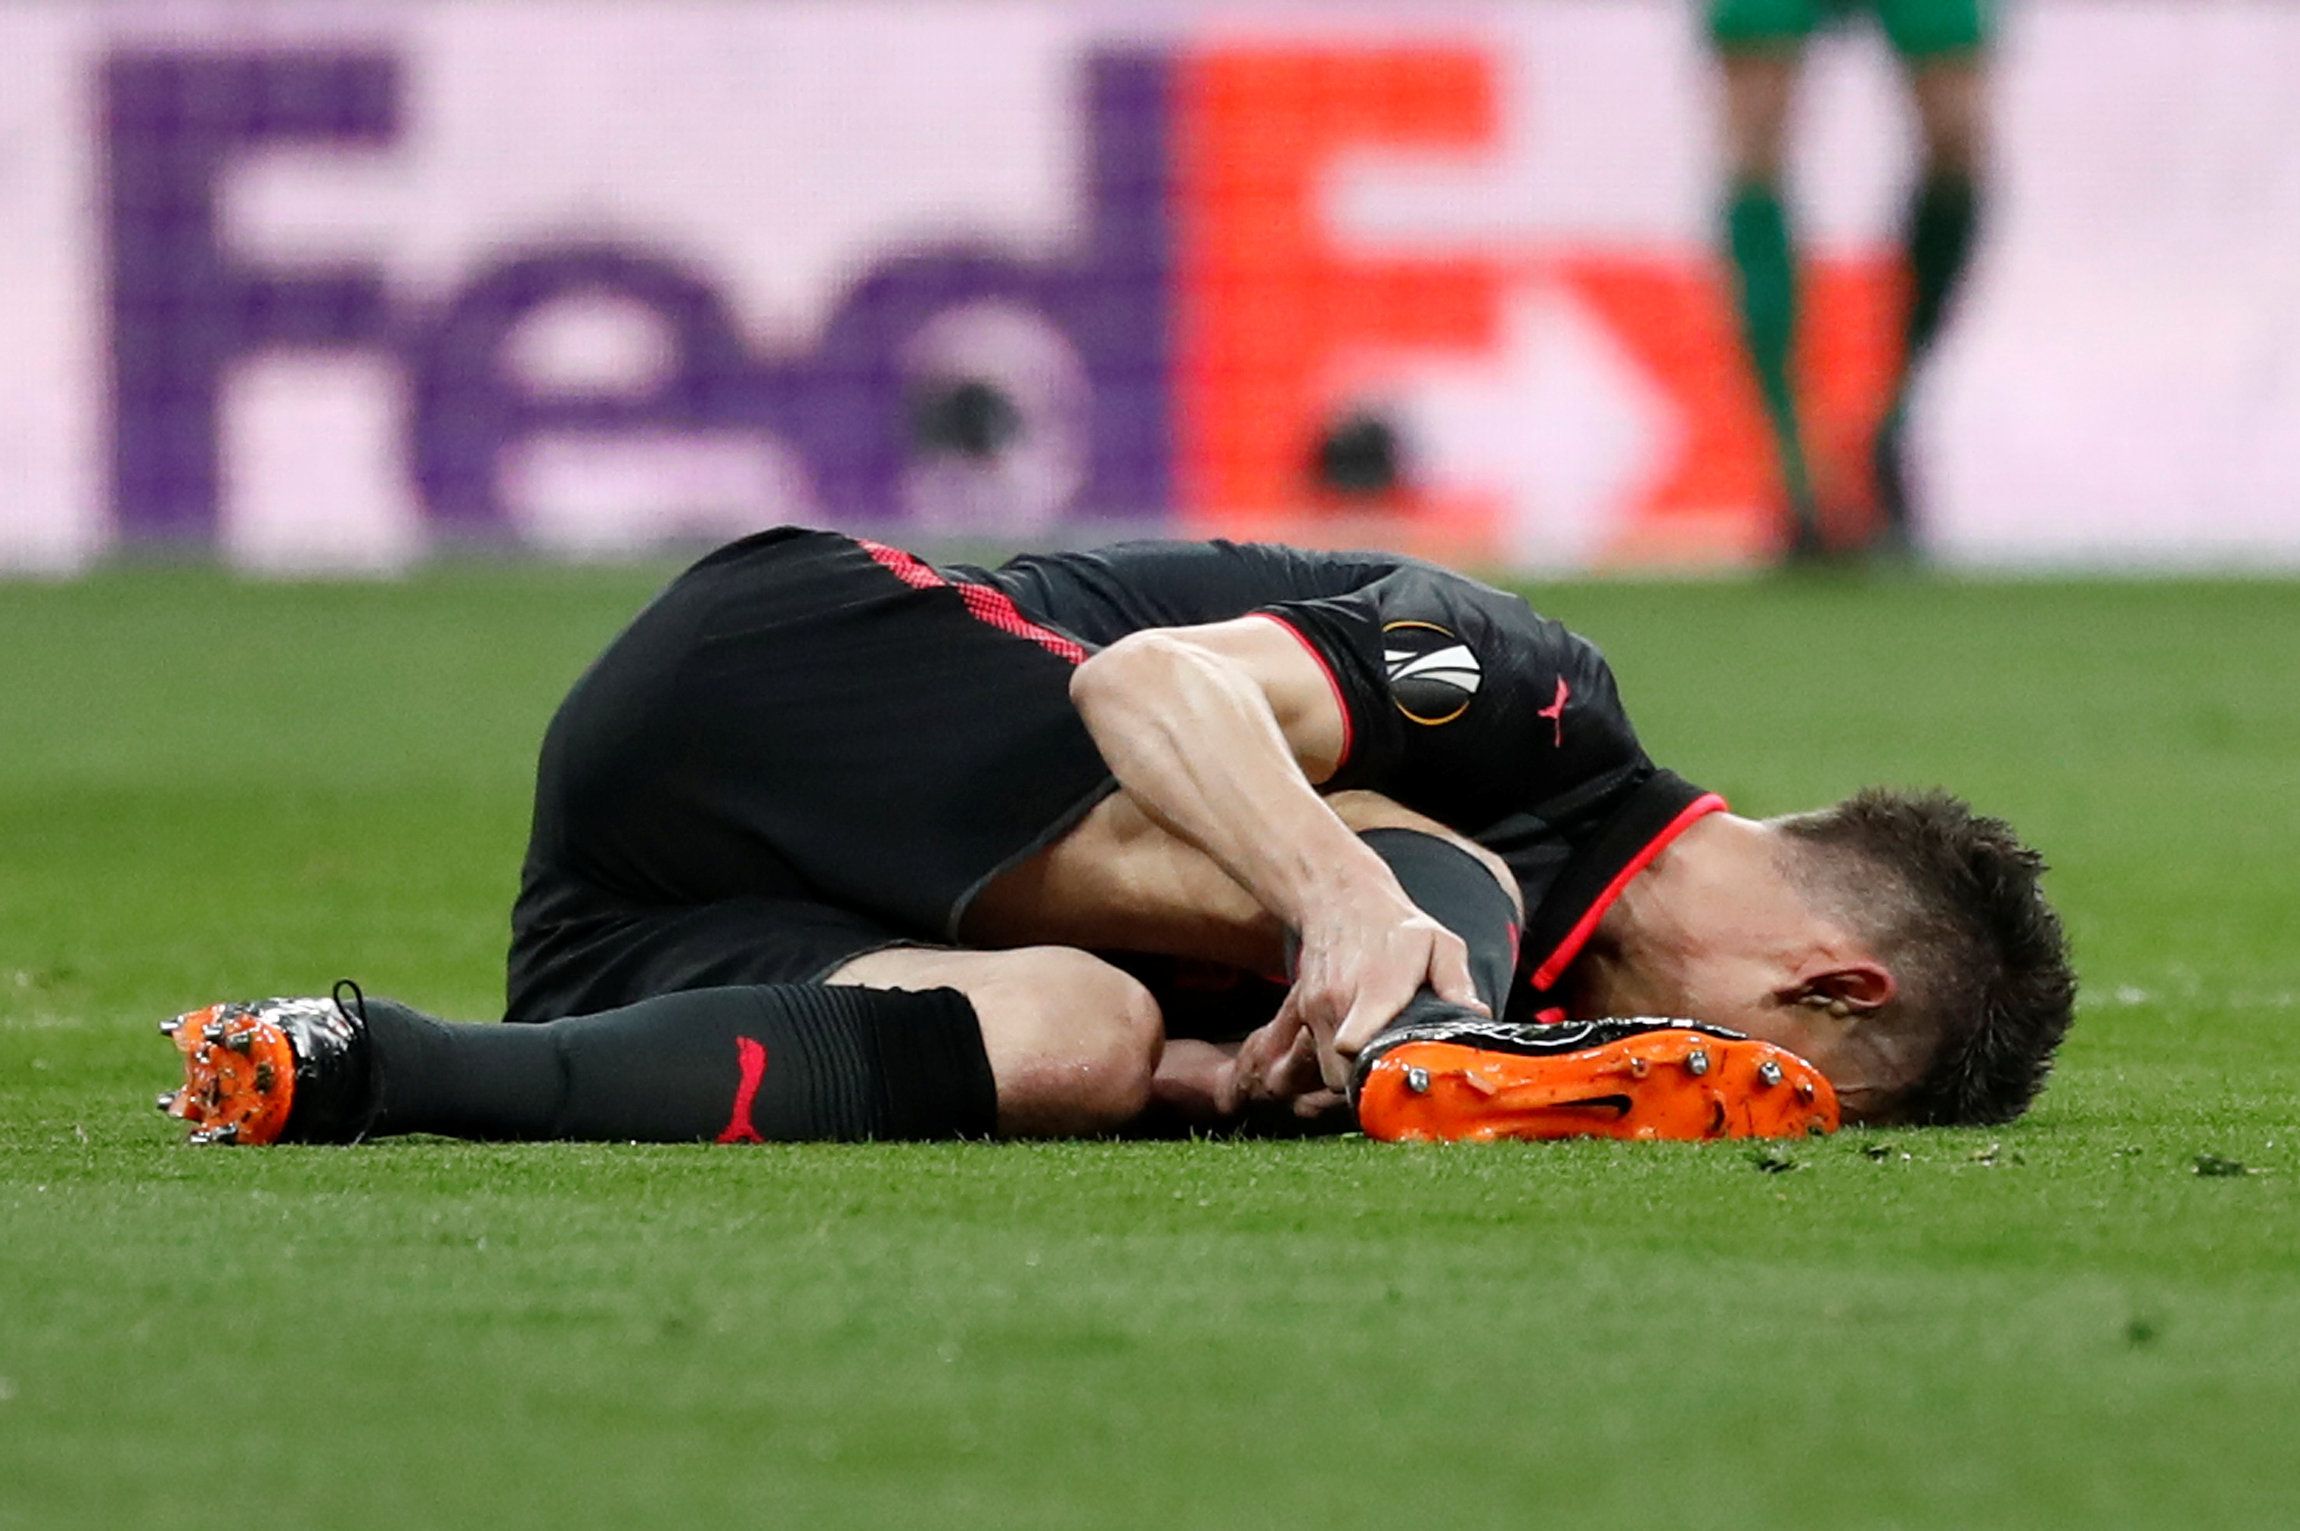 Laurent Koscielny suffers an injury during Arsenal's Europa League match against Atletico Madrid